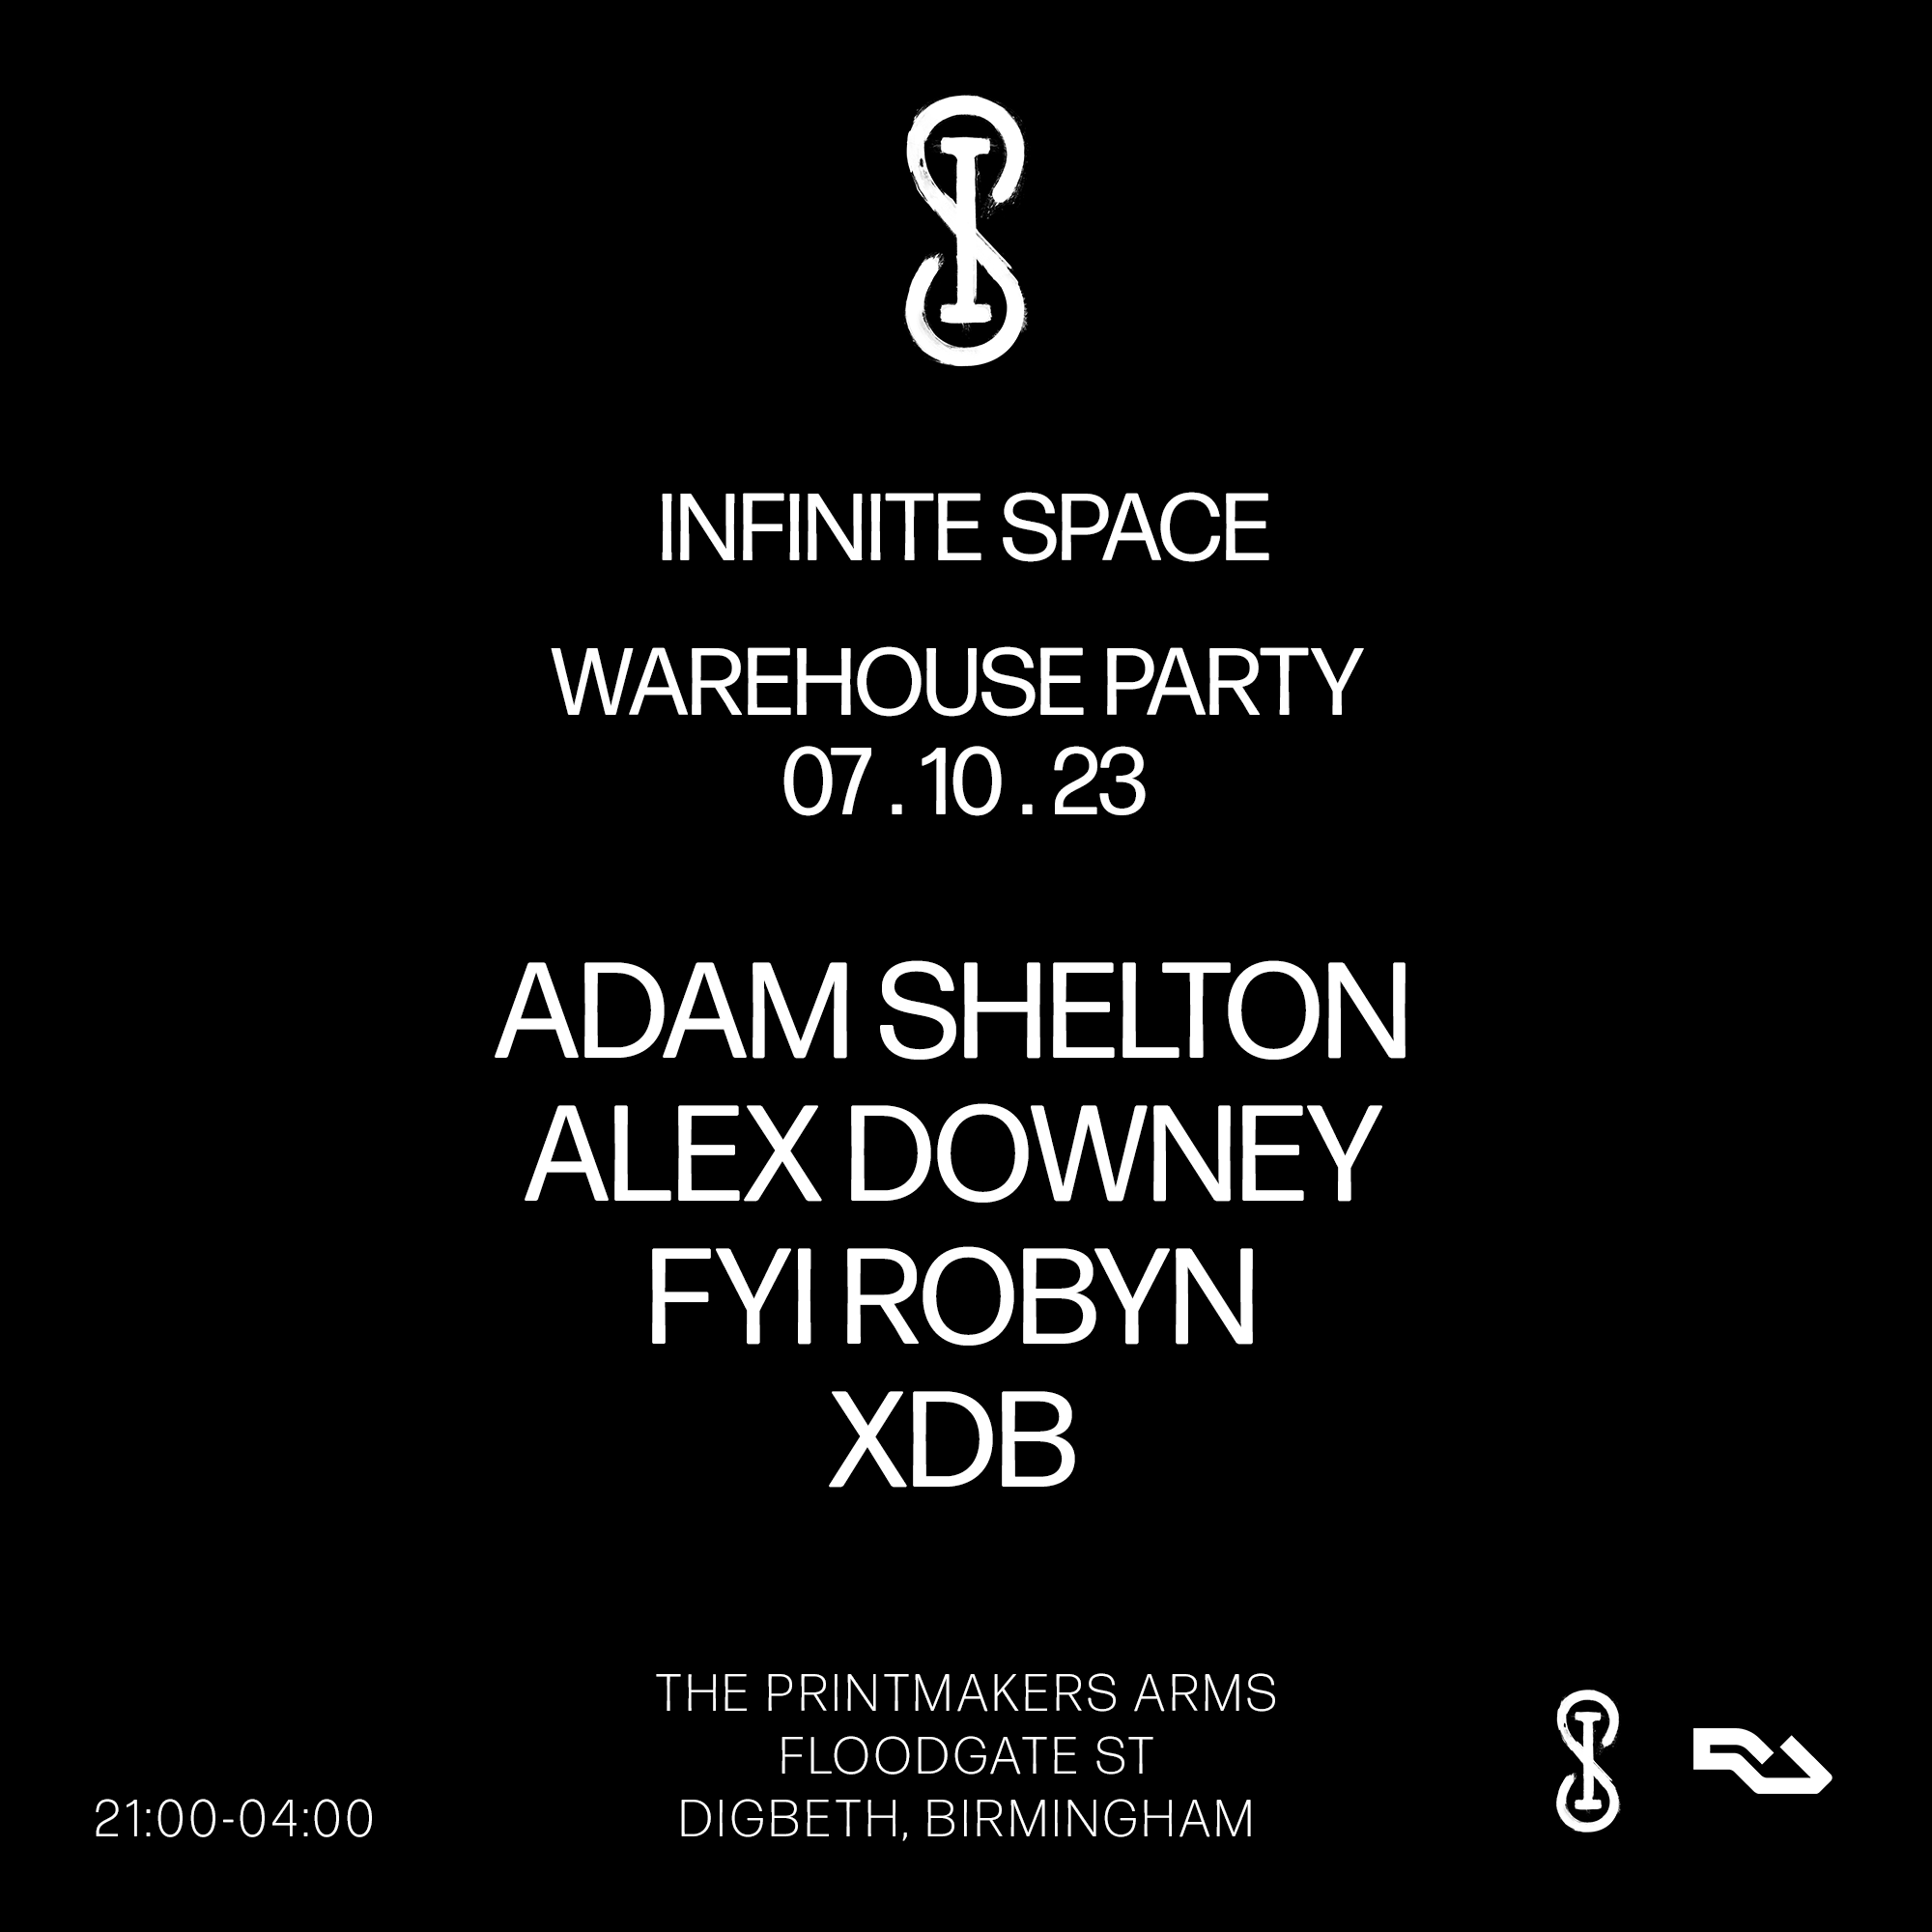 Infinite Space Warehouse Party with XDB - フライヤー表